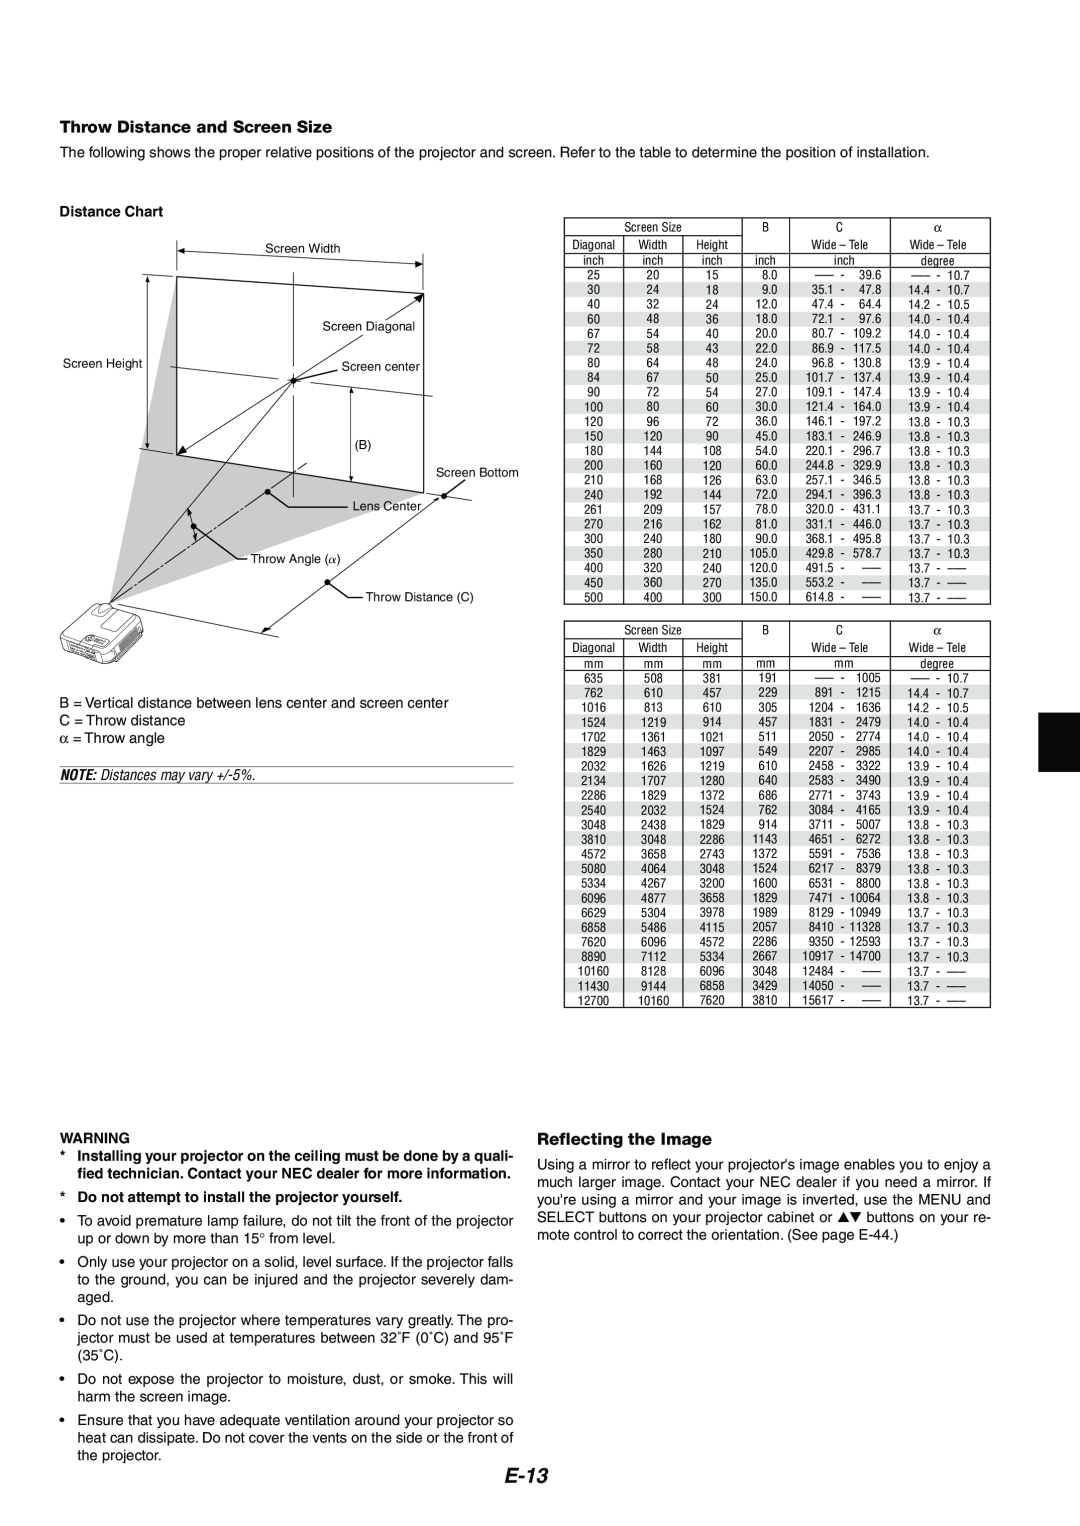 NEC MT1065/MT1060 user manual E-13, Throw Distance and Screen Size, Reflecting the Image, Distance Chart 